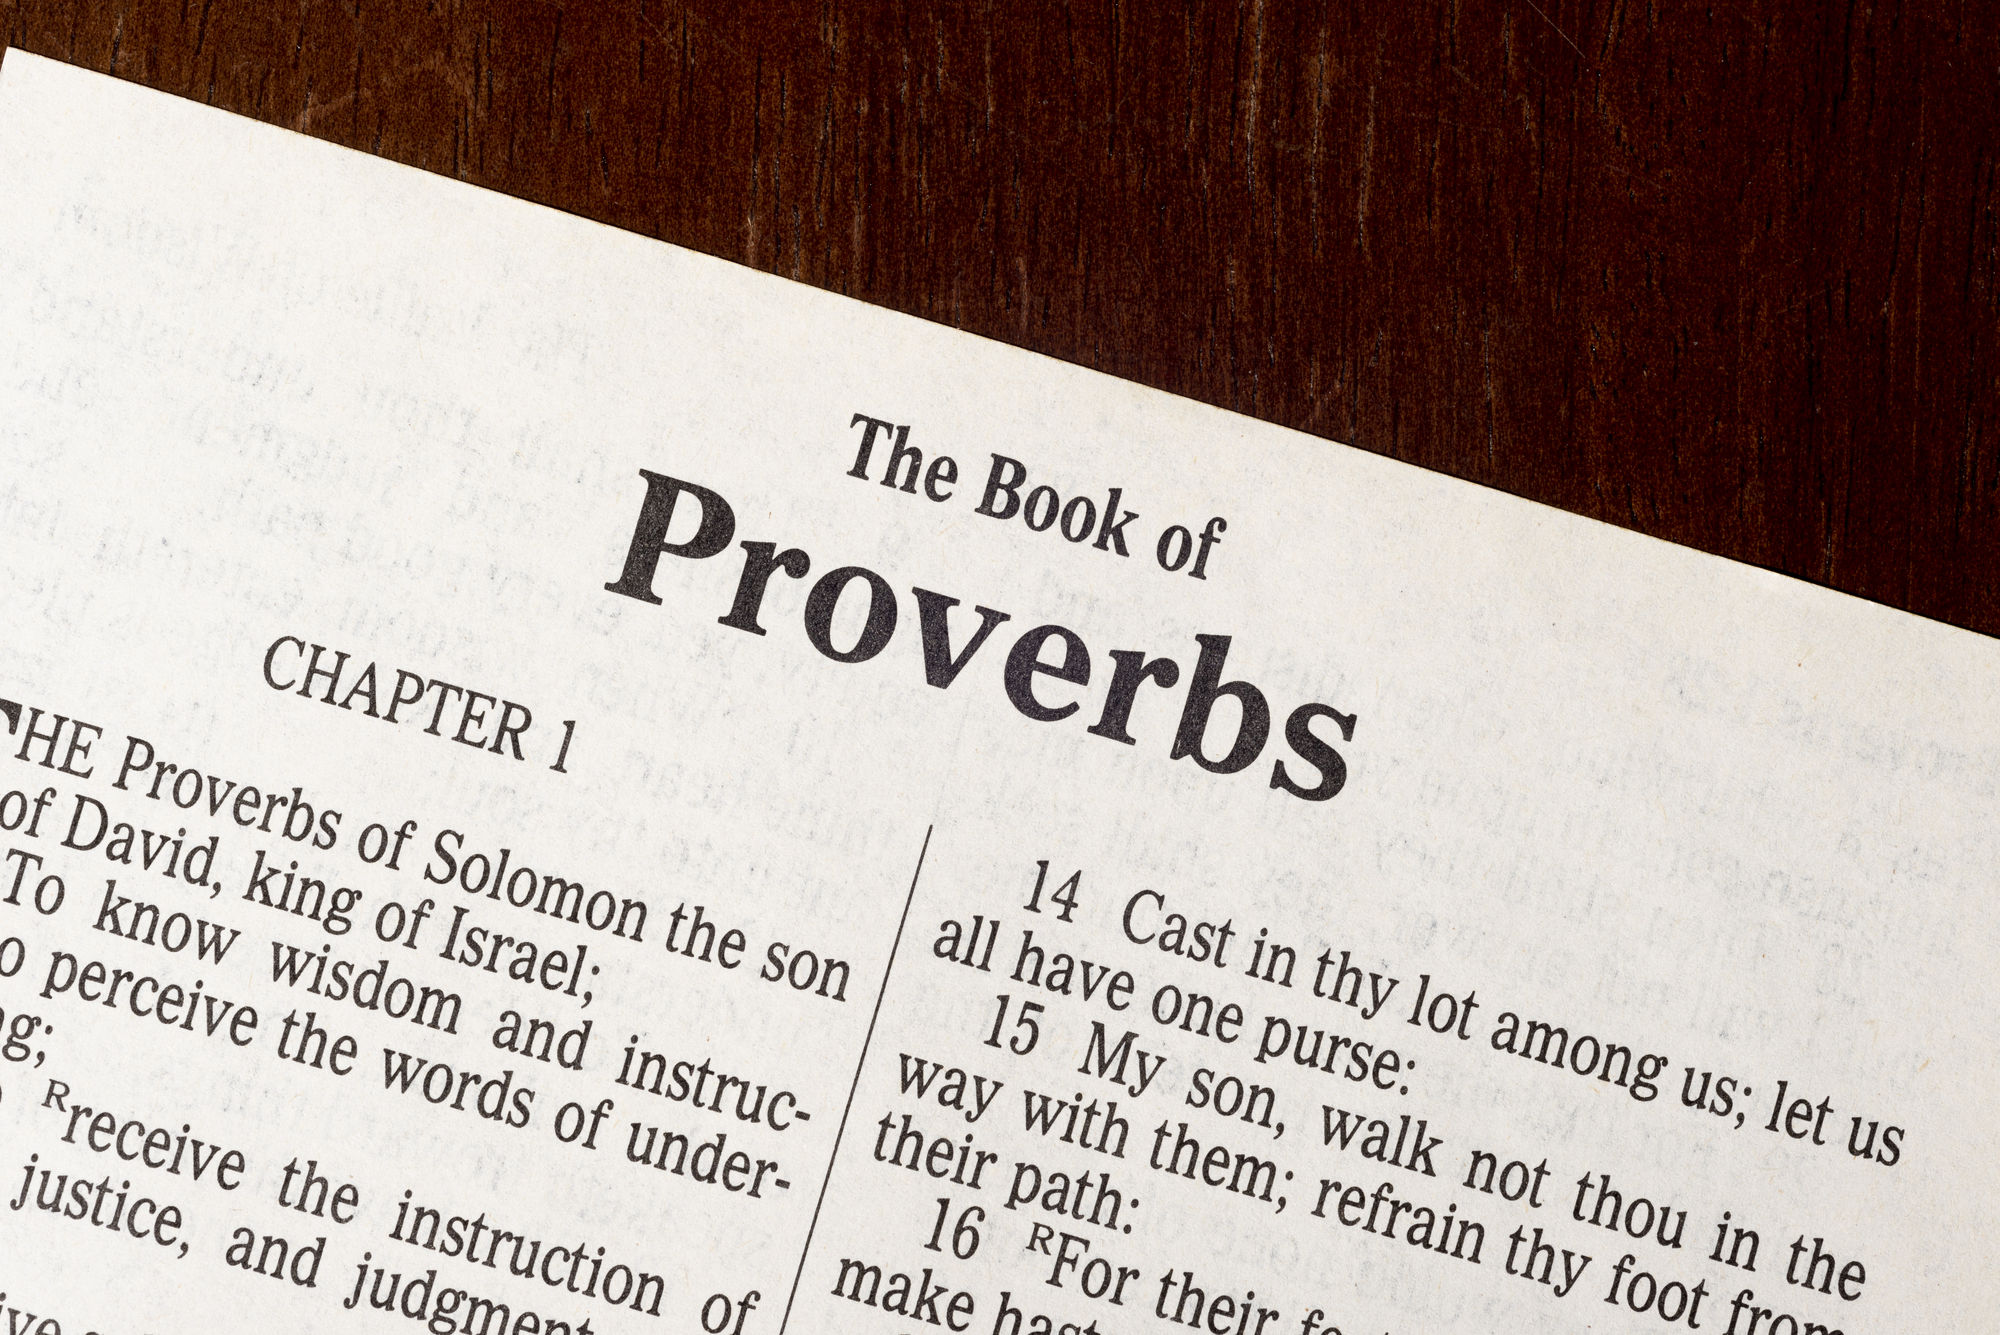 The Book of Proverbs (KJV)